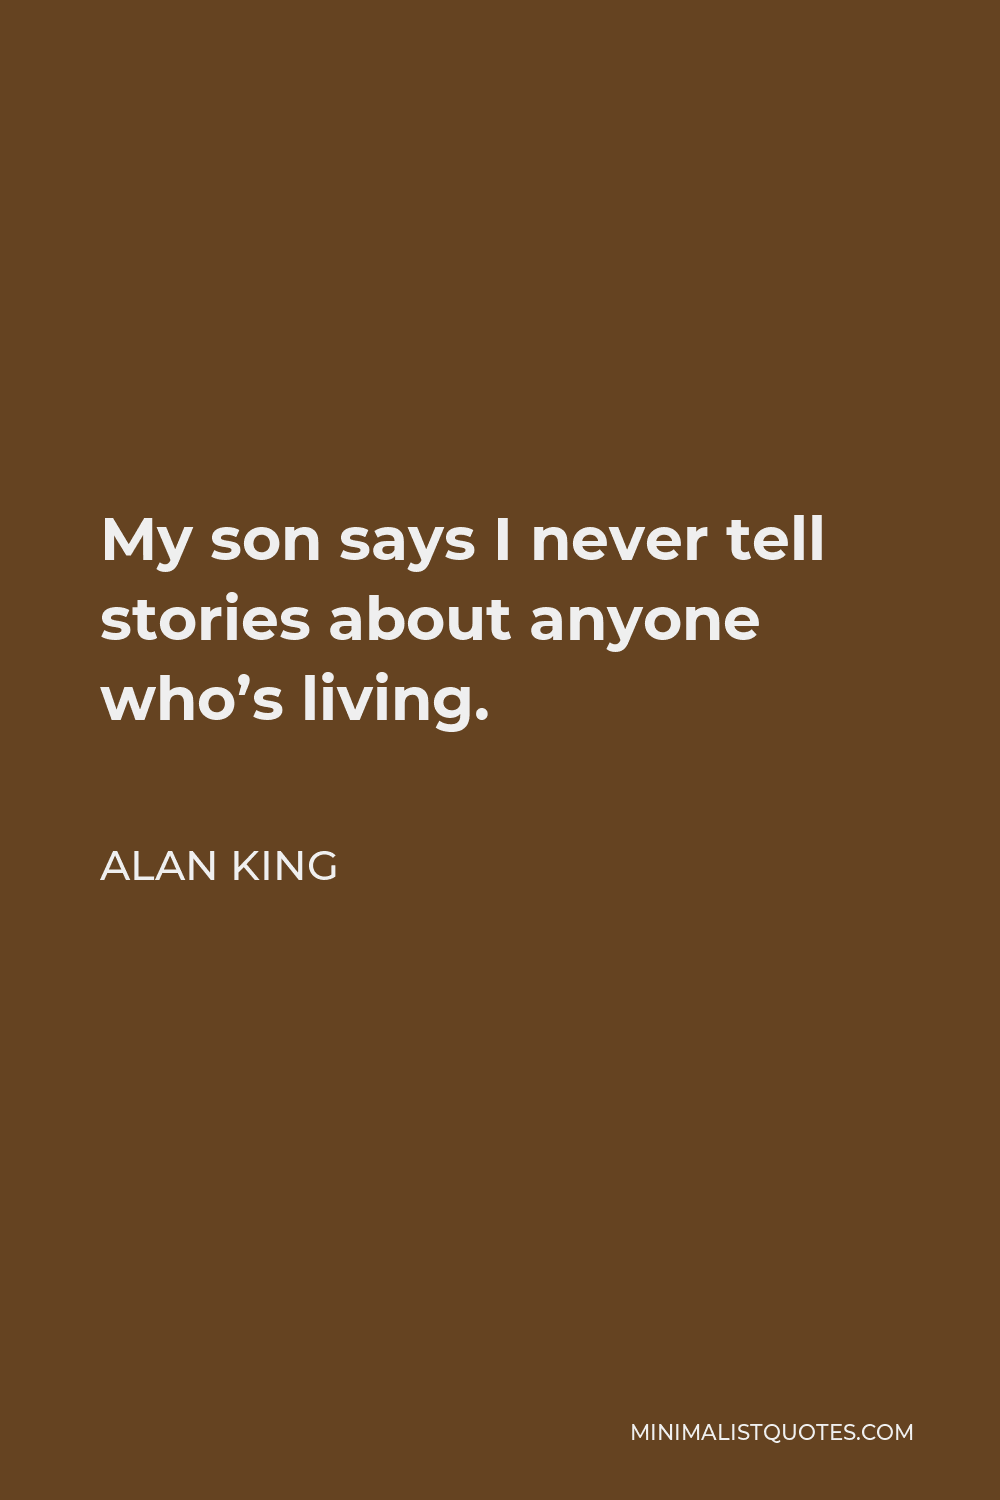 Alan King Quote - My son says I never tell stories about anyone who’s living.